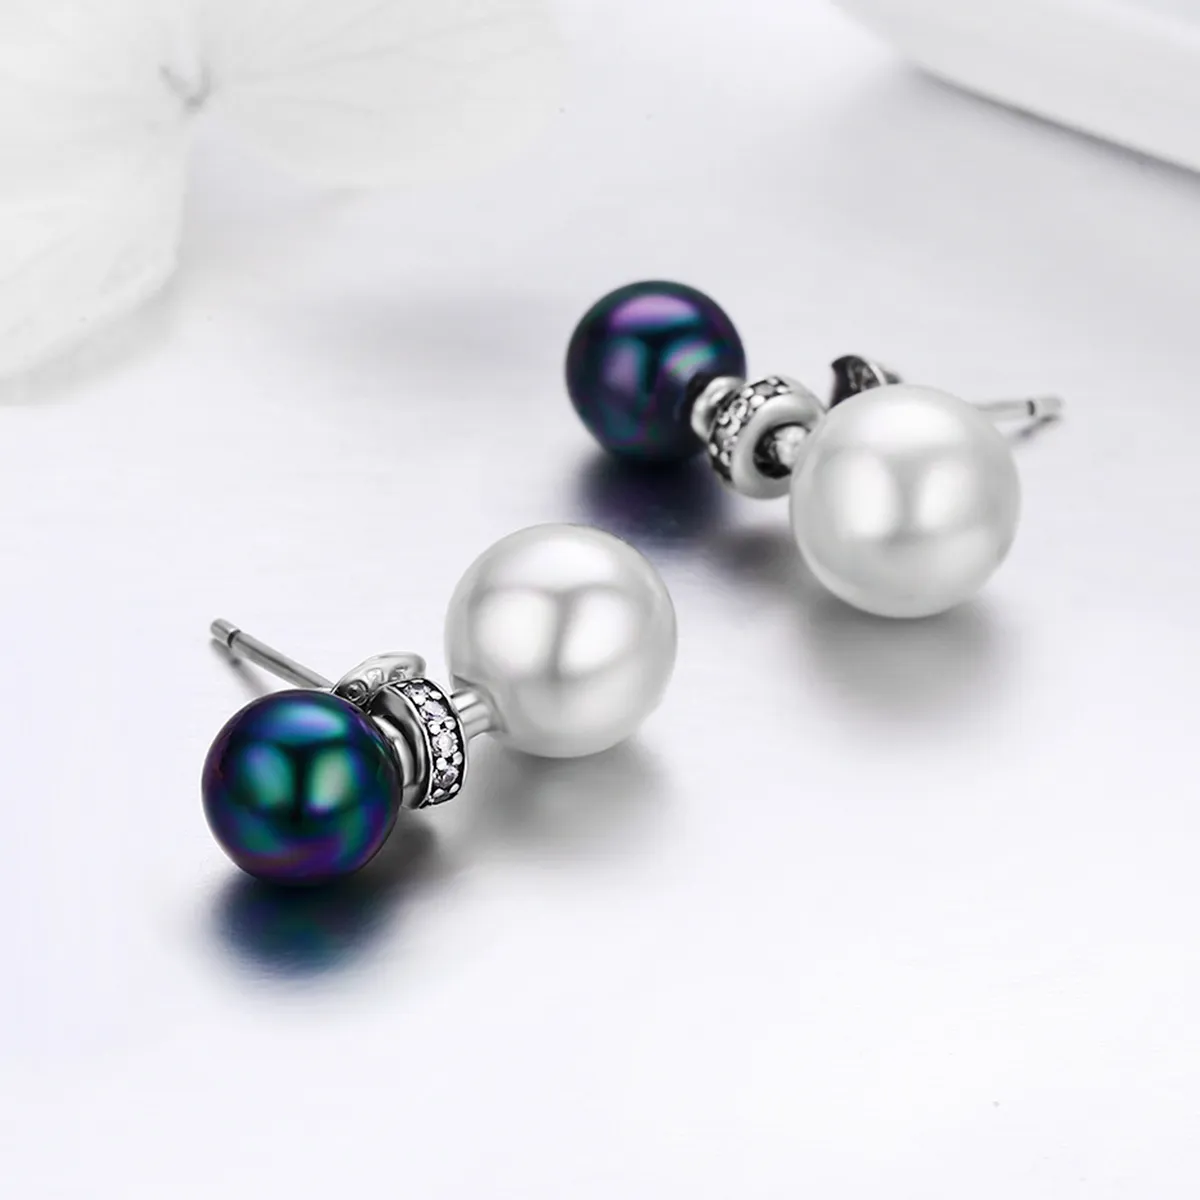 Pandora Style Silver Black and White Impression Hanging Earrings - SCE304